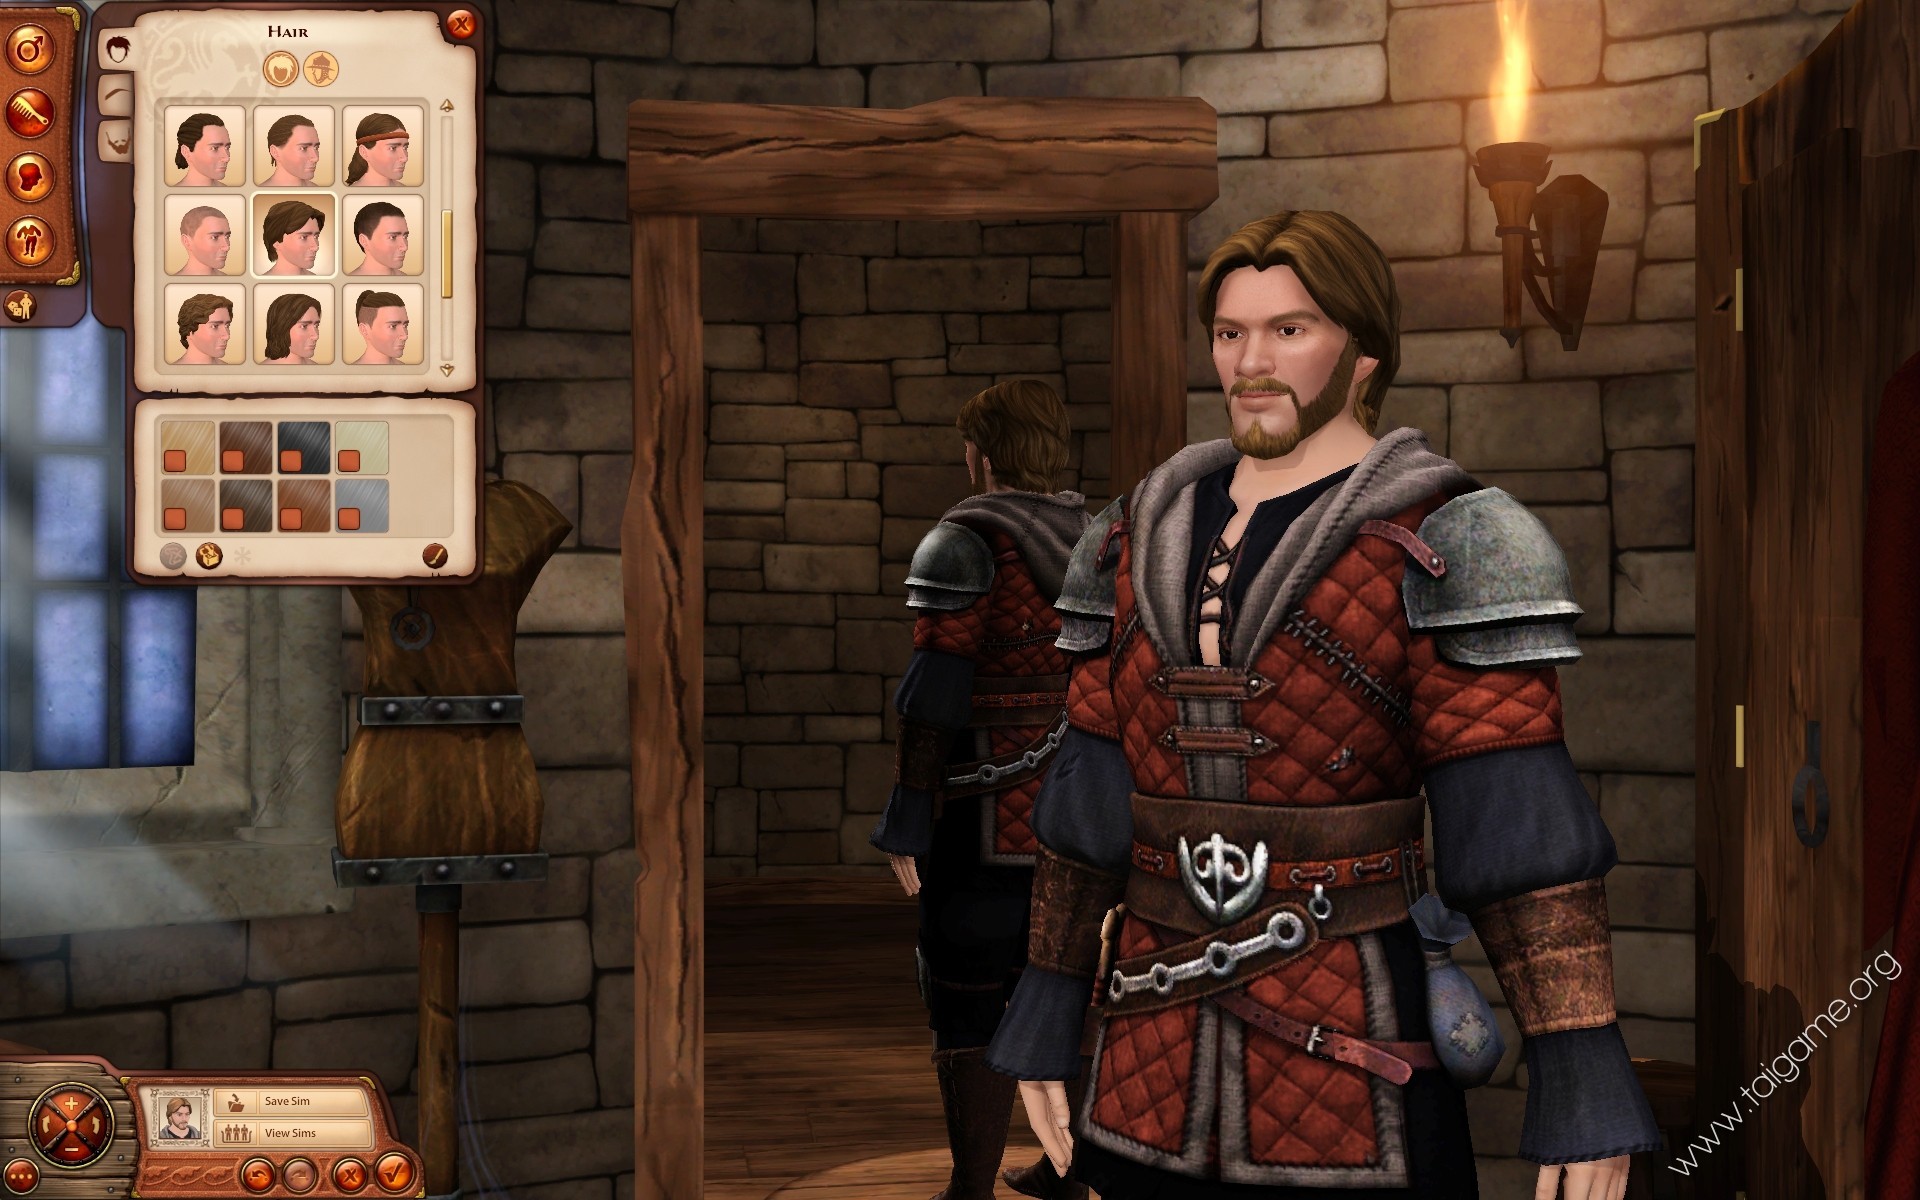 Sims Medieval Update Patch Download